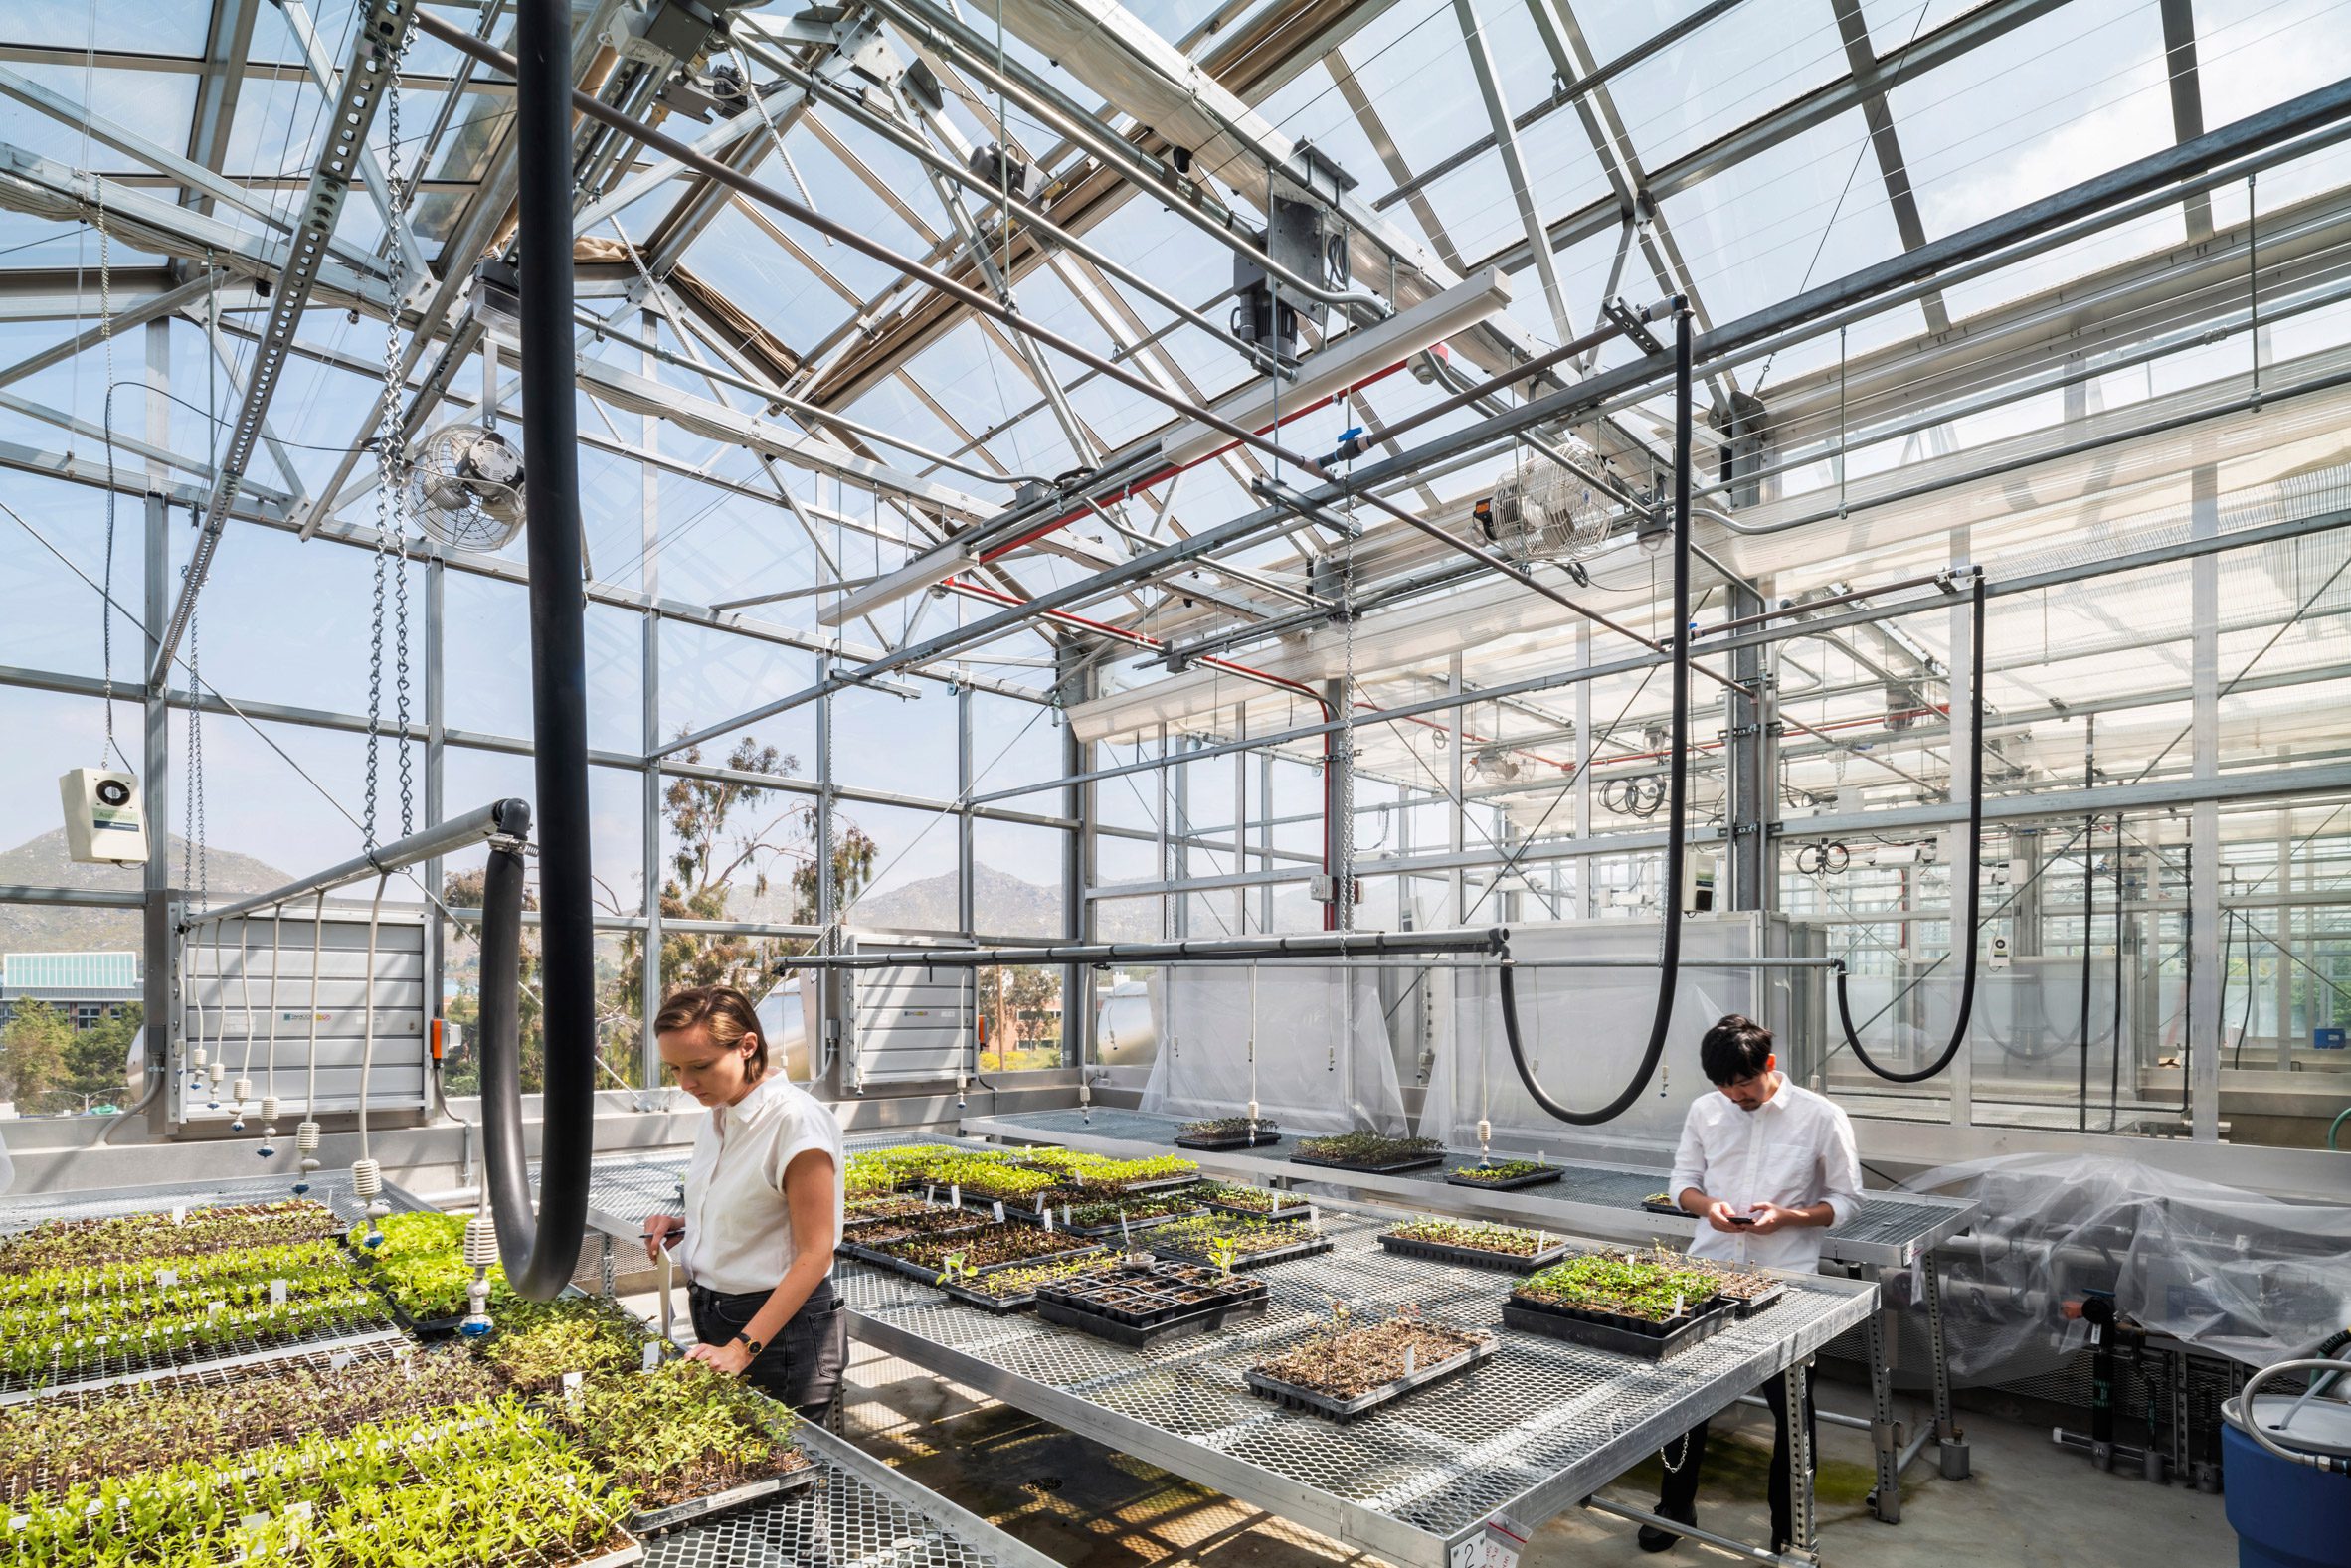 Greenhouse workers with young plants